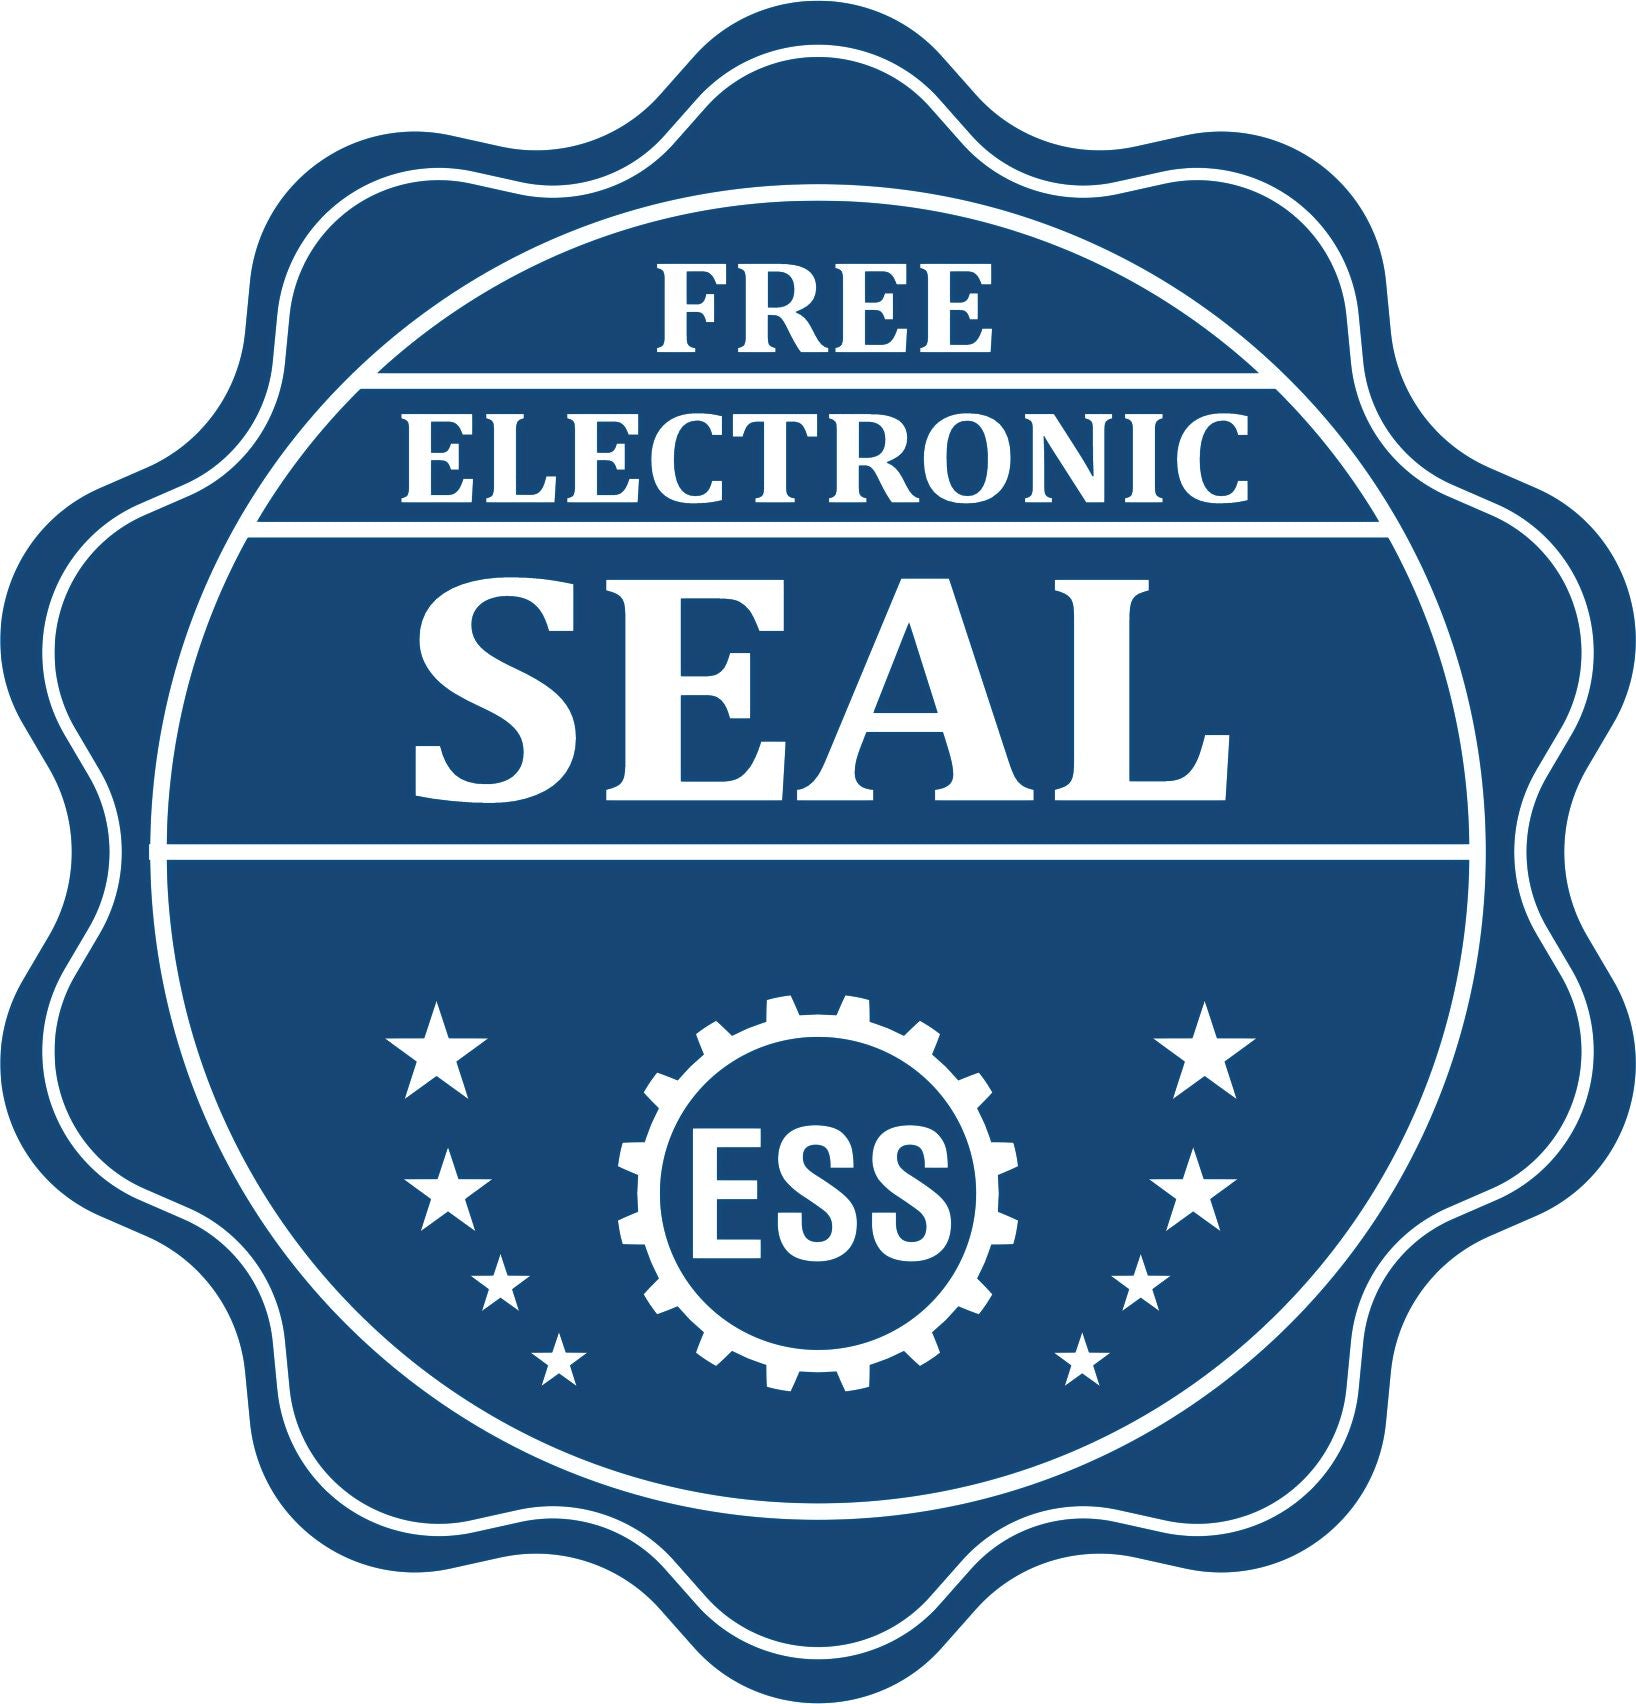 A badge showing a free electronic seal for the Handheld Washington Professional Engineer Embosser with stars and the ESS gear on the emblem.